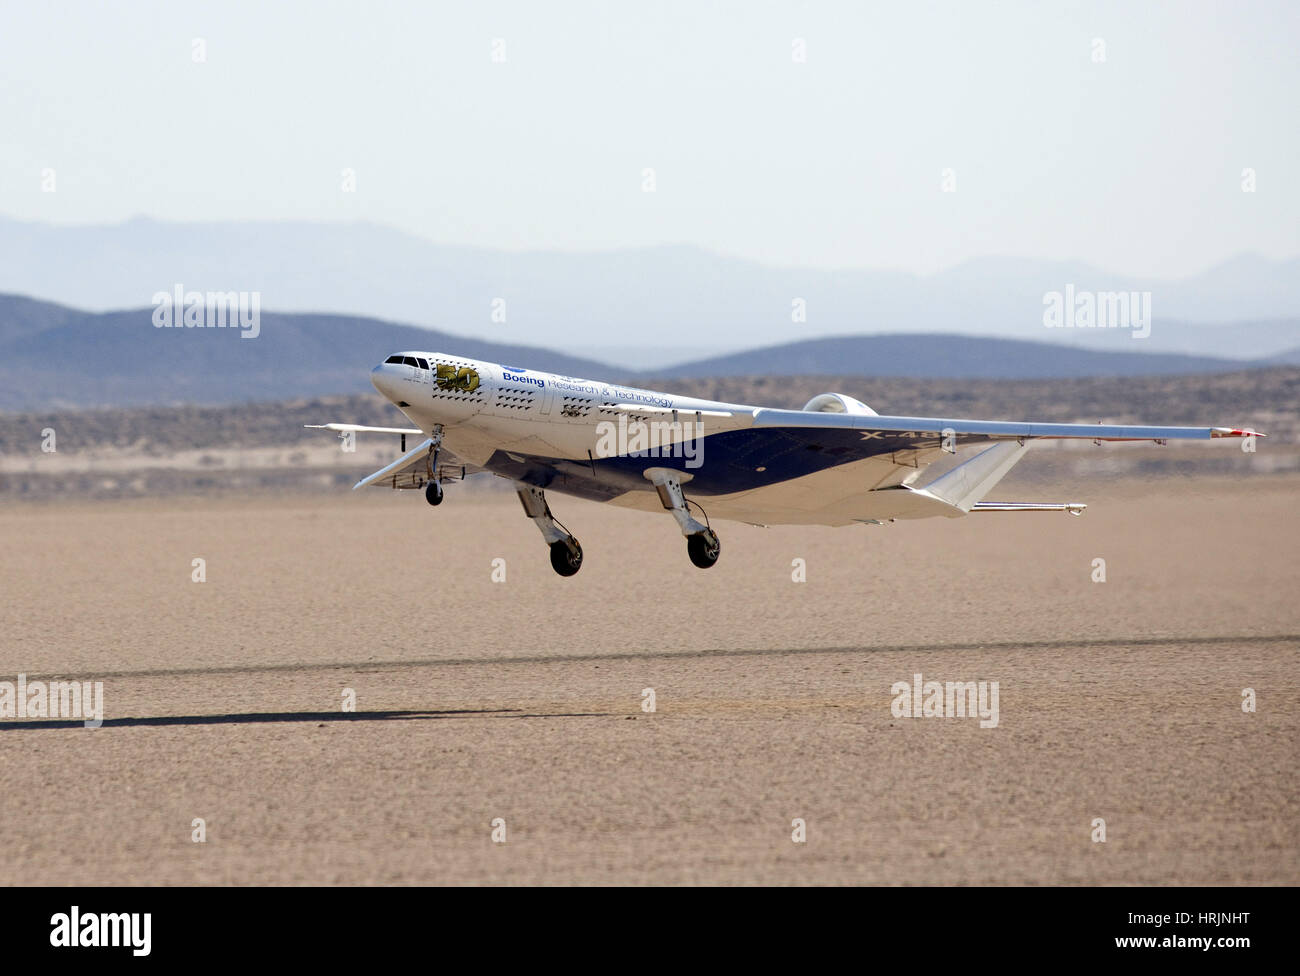 X - 48C Blended Wing Body Aircraft, 2012 Stockfoto